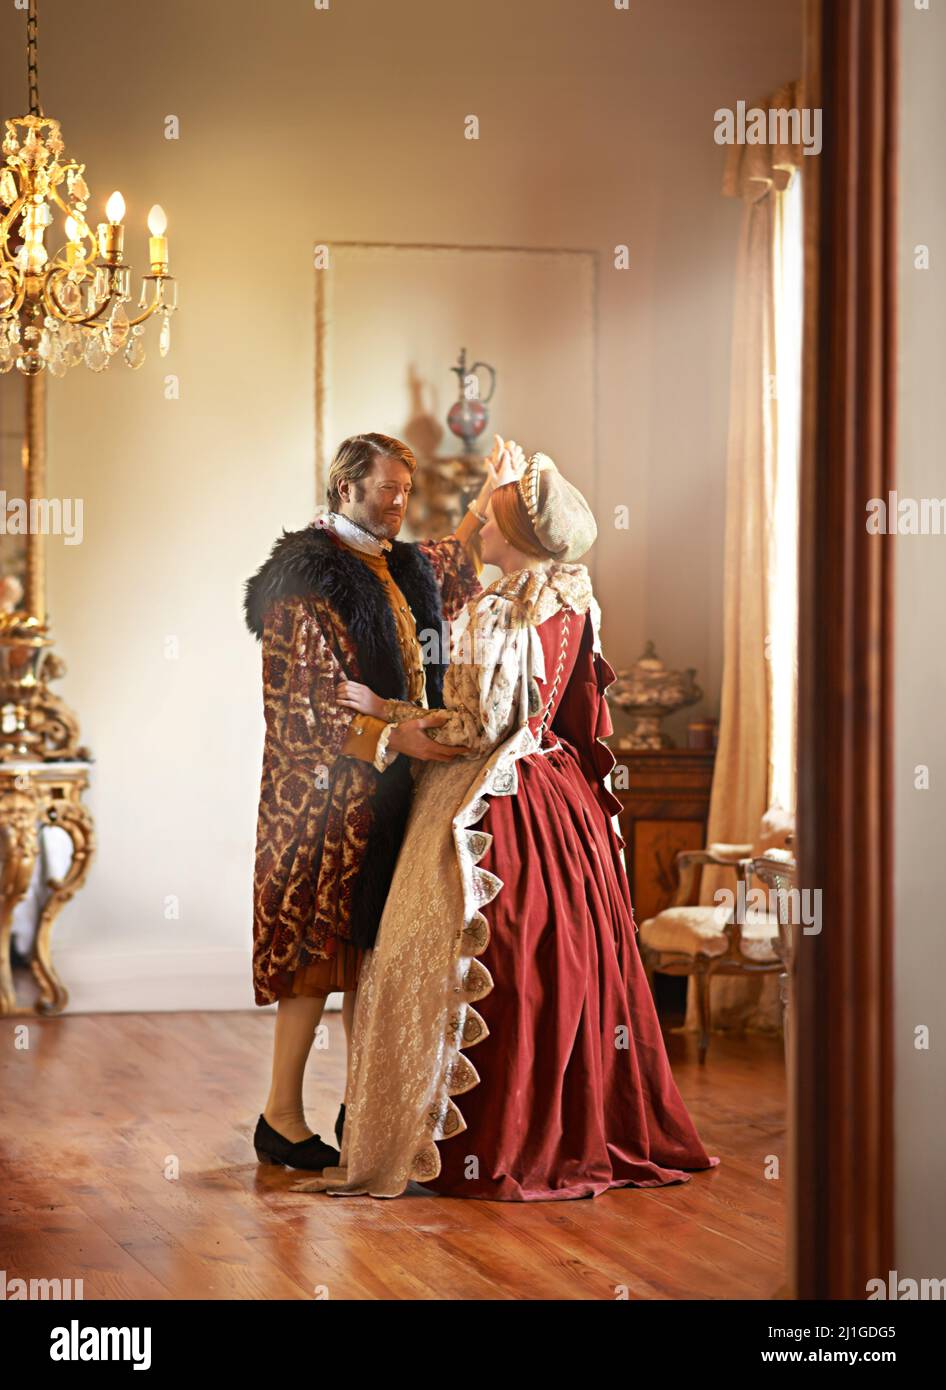 Sharing a tender moment. A king and queen dancing together in their palace. Stock Photo